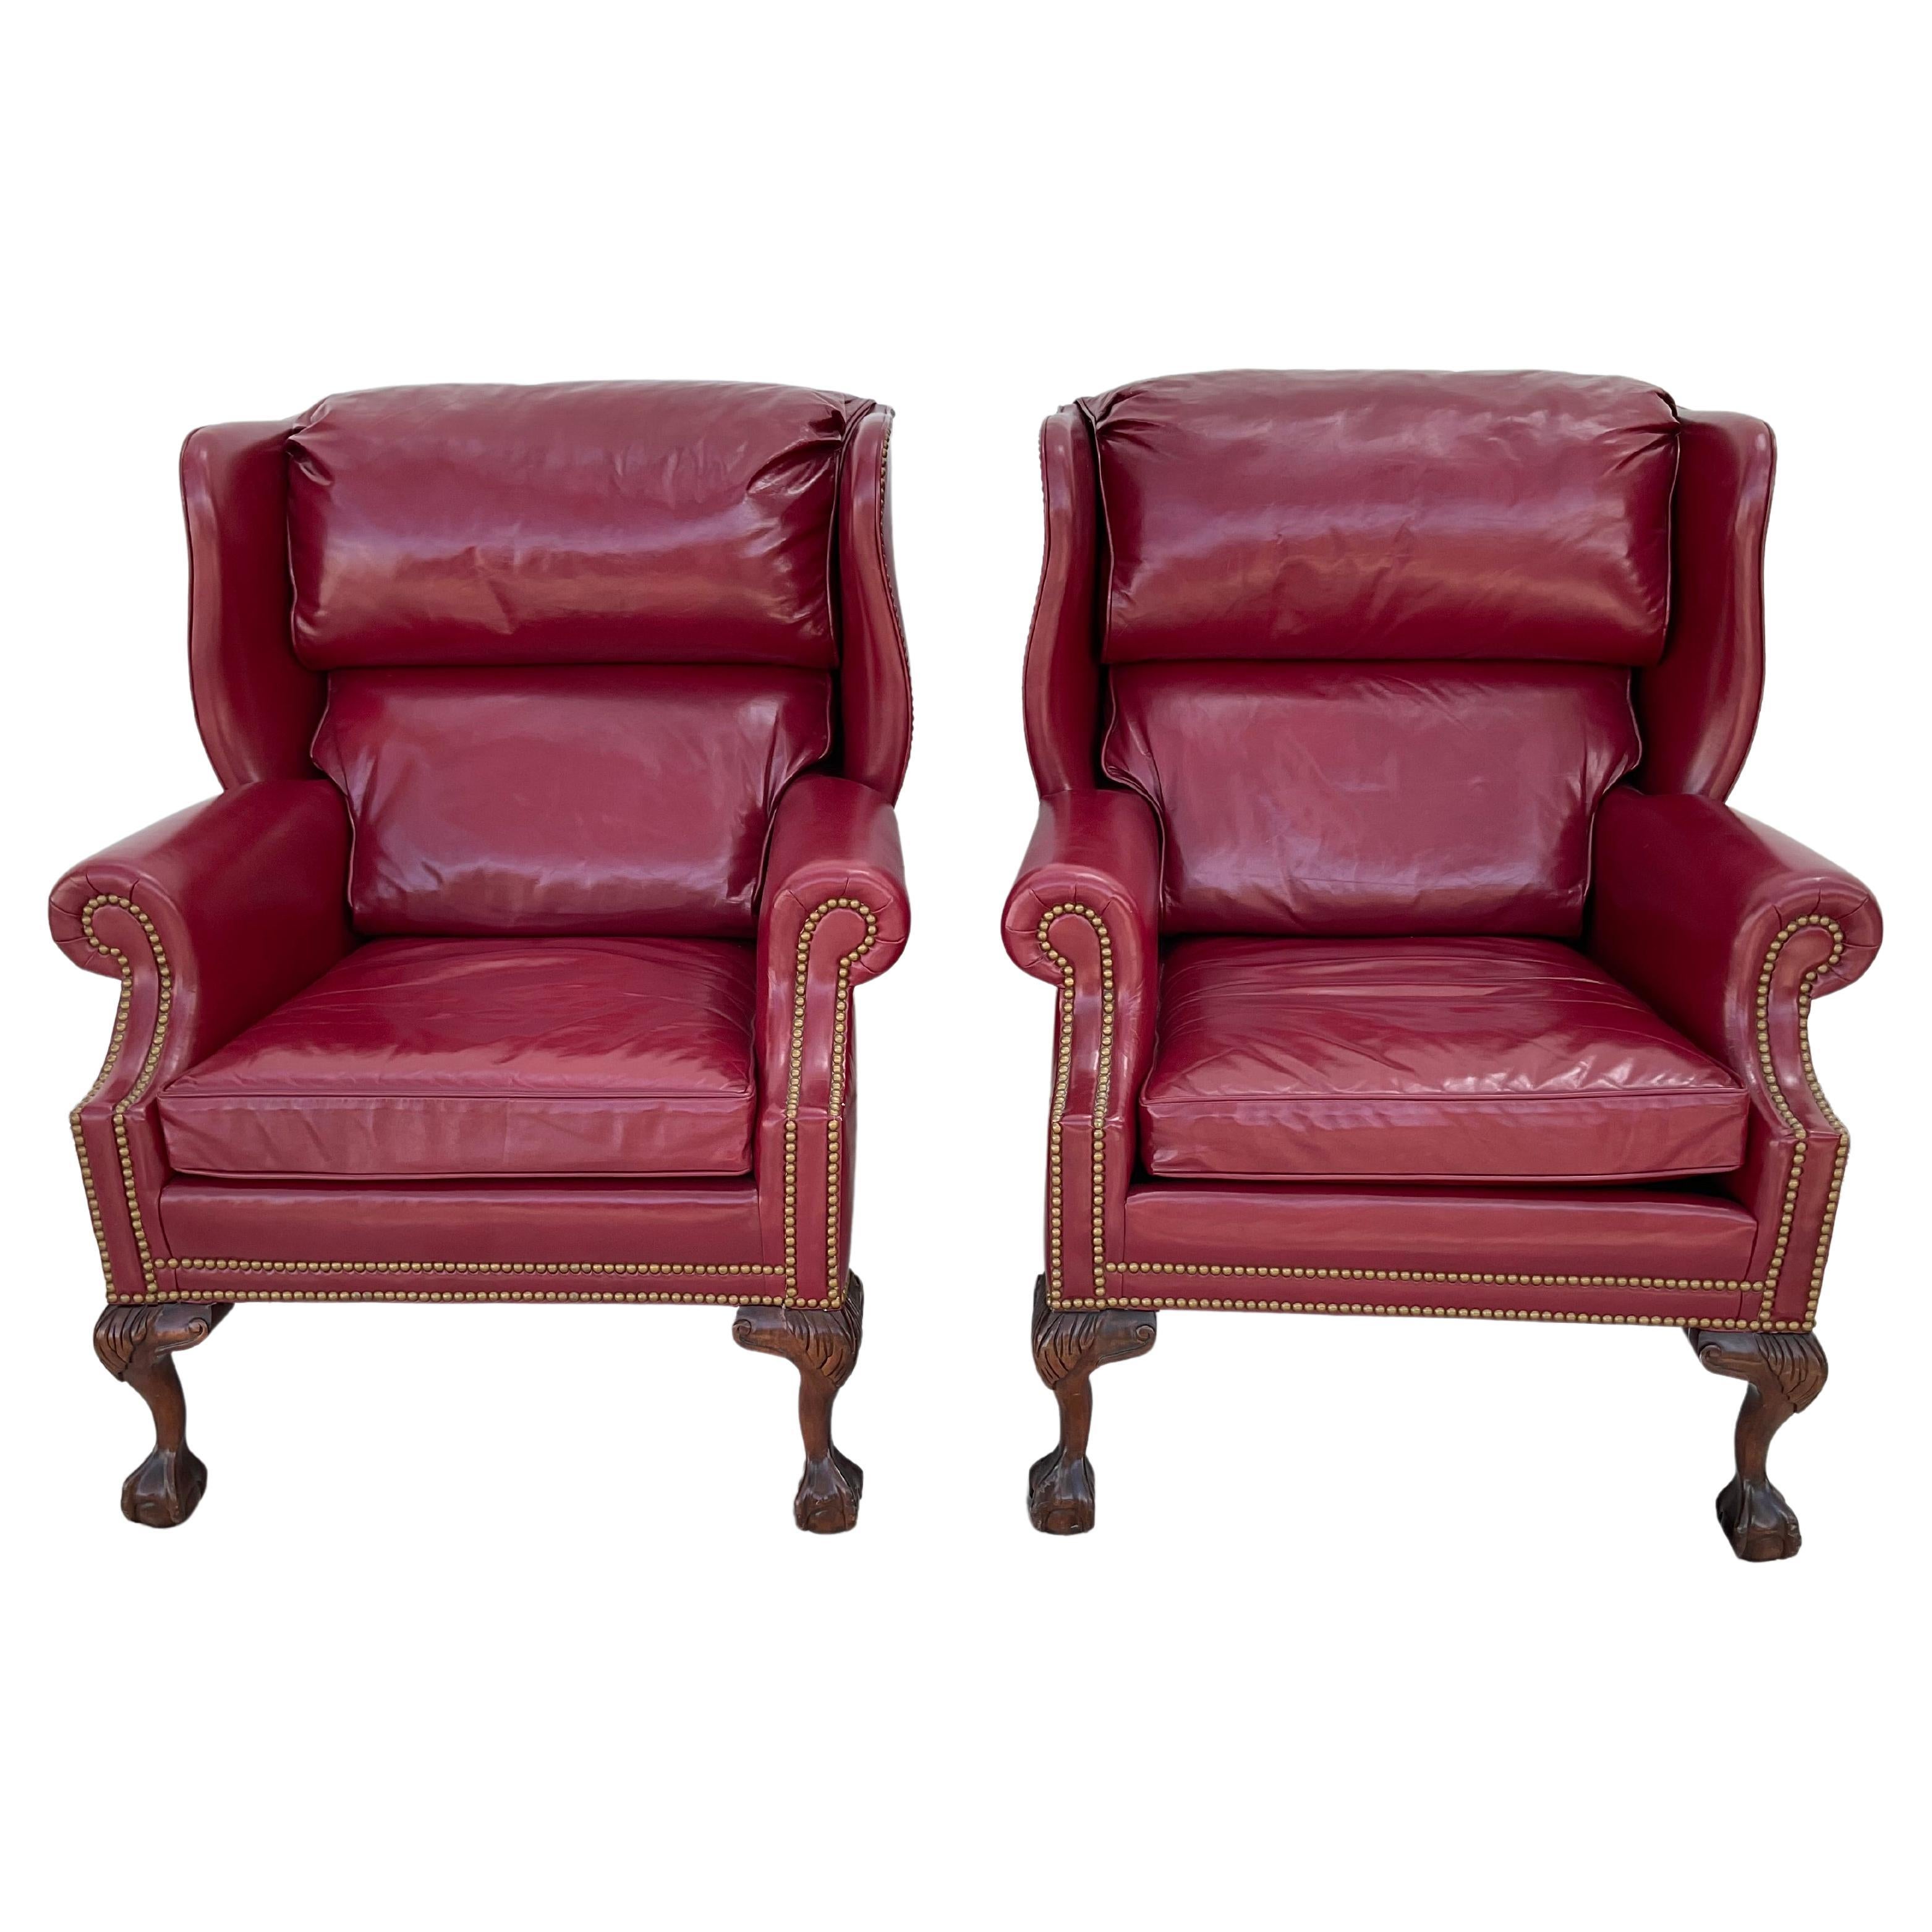 Pair of Hancock And Moore Wingback Ball And Claw Leather Chairs